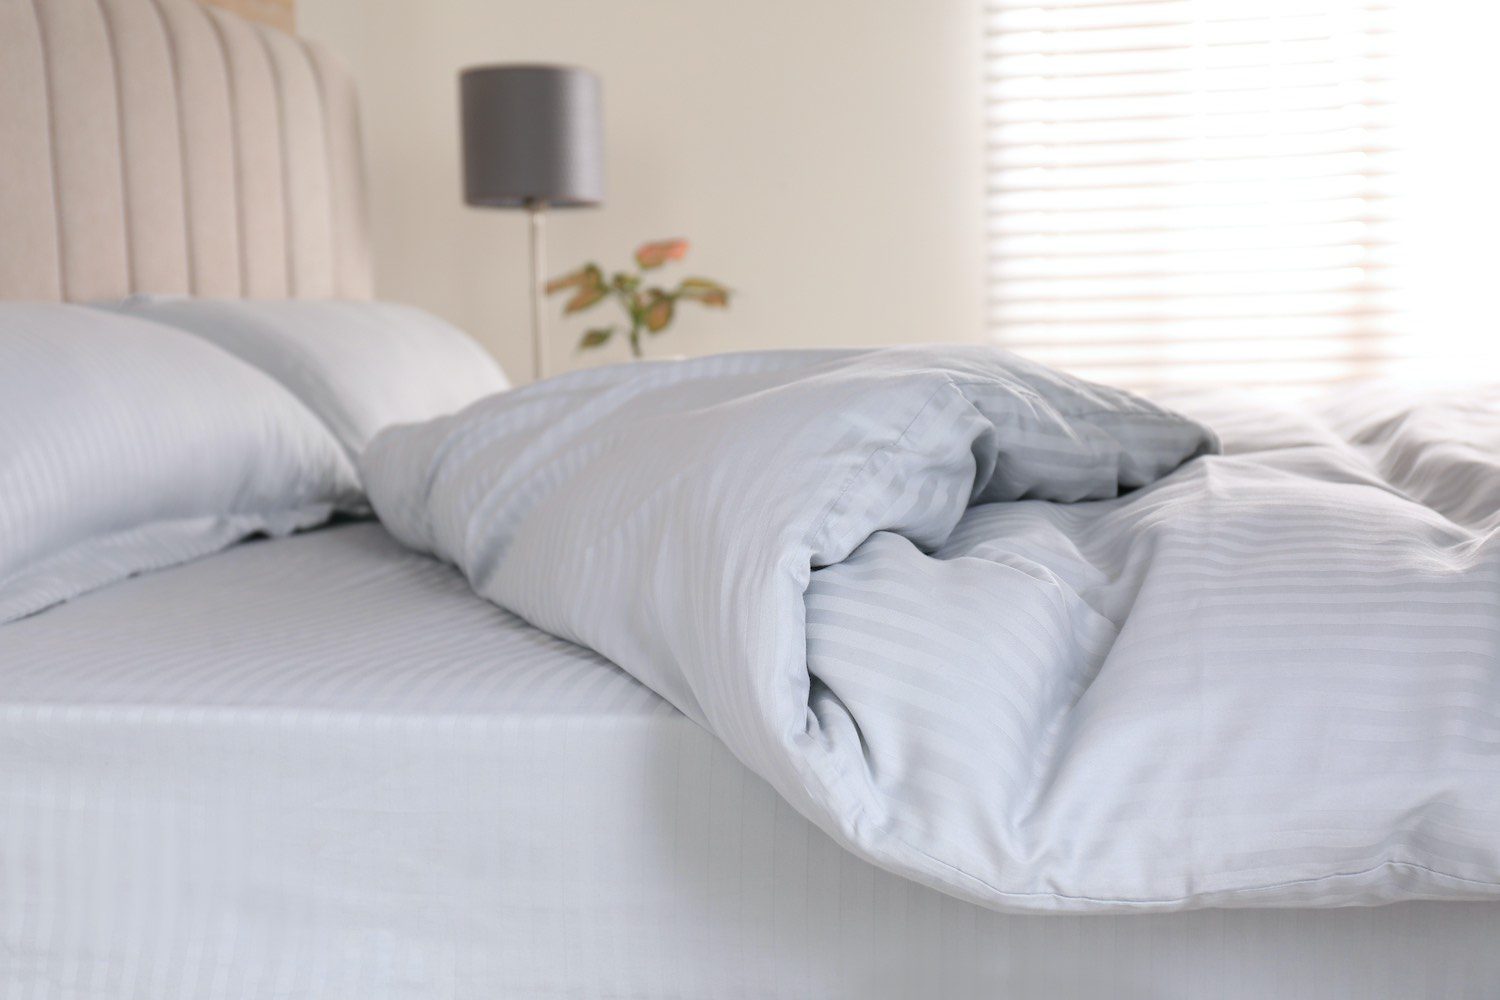 What Is A Duvet Cover Sleep Foundation, What To Fill A Duvet With